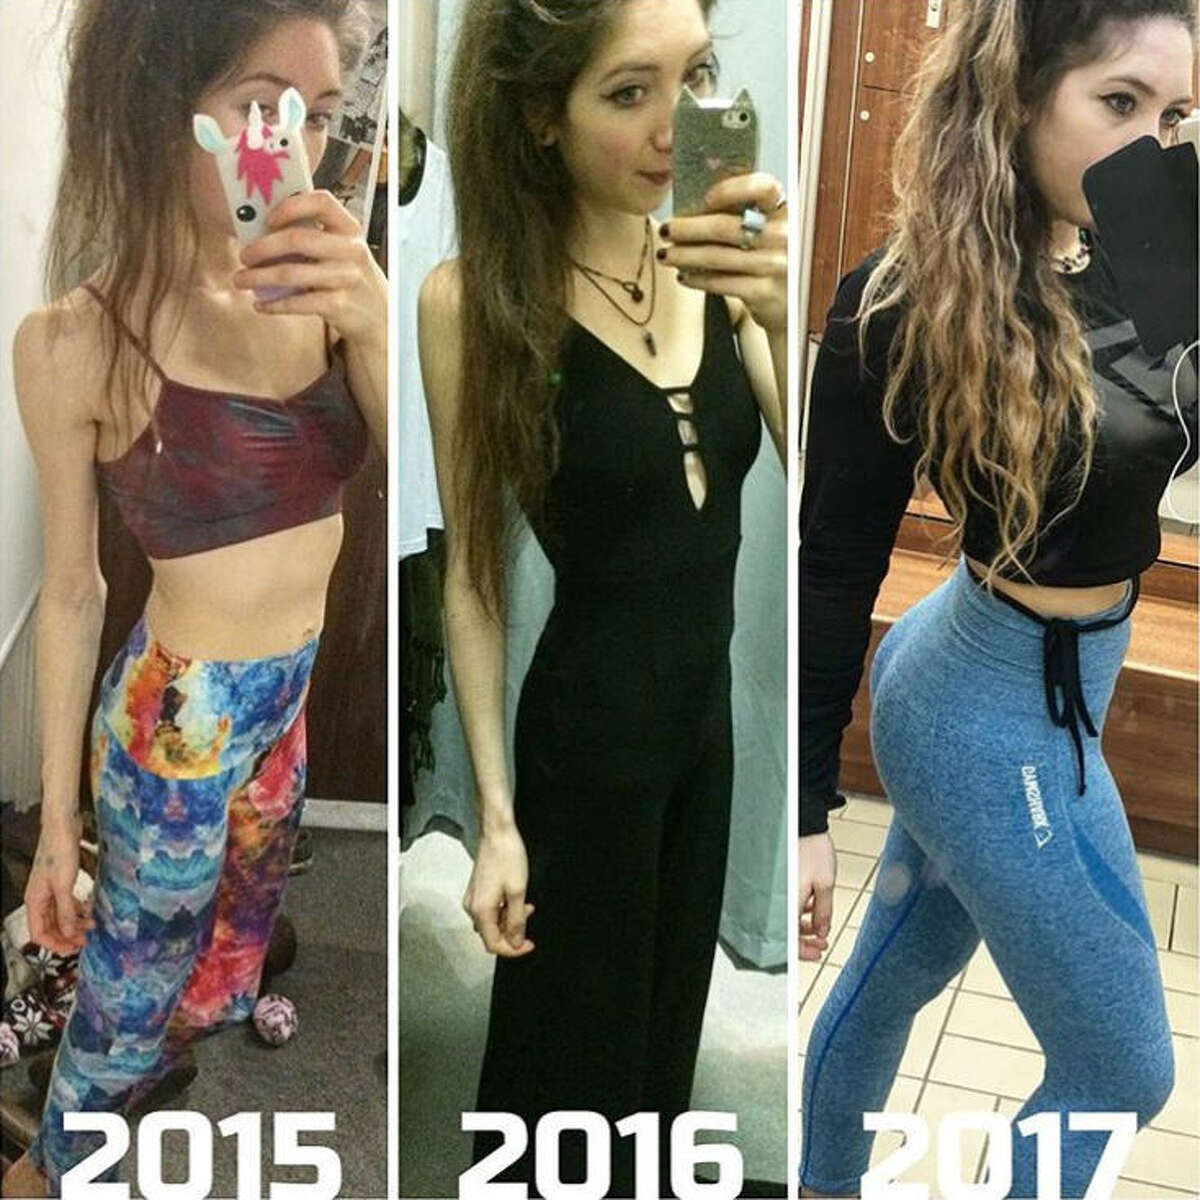 Fitness blogger Sophia Ellis, 21, says she overcame anorexia and bulimia thanks to becoming vegan and bodybuilding.